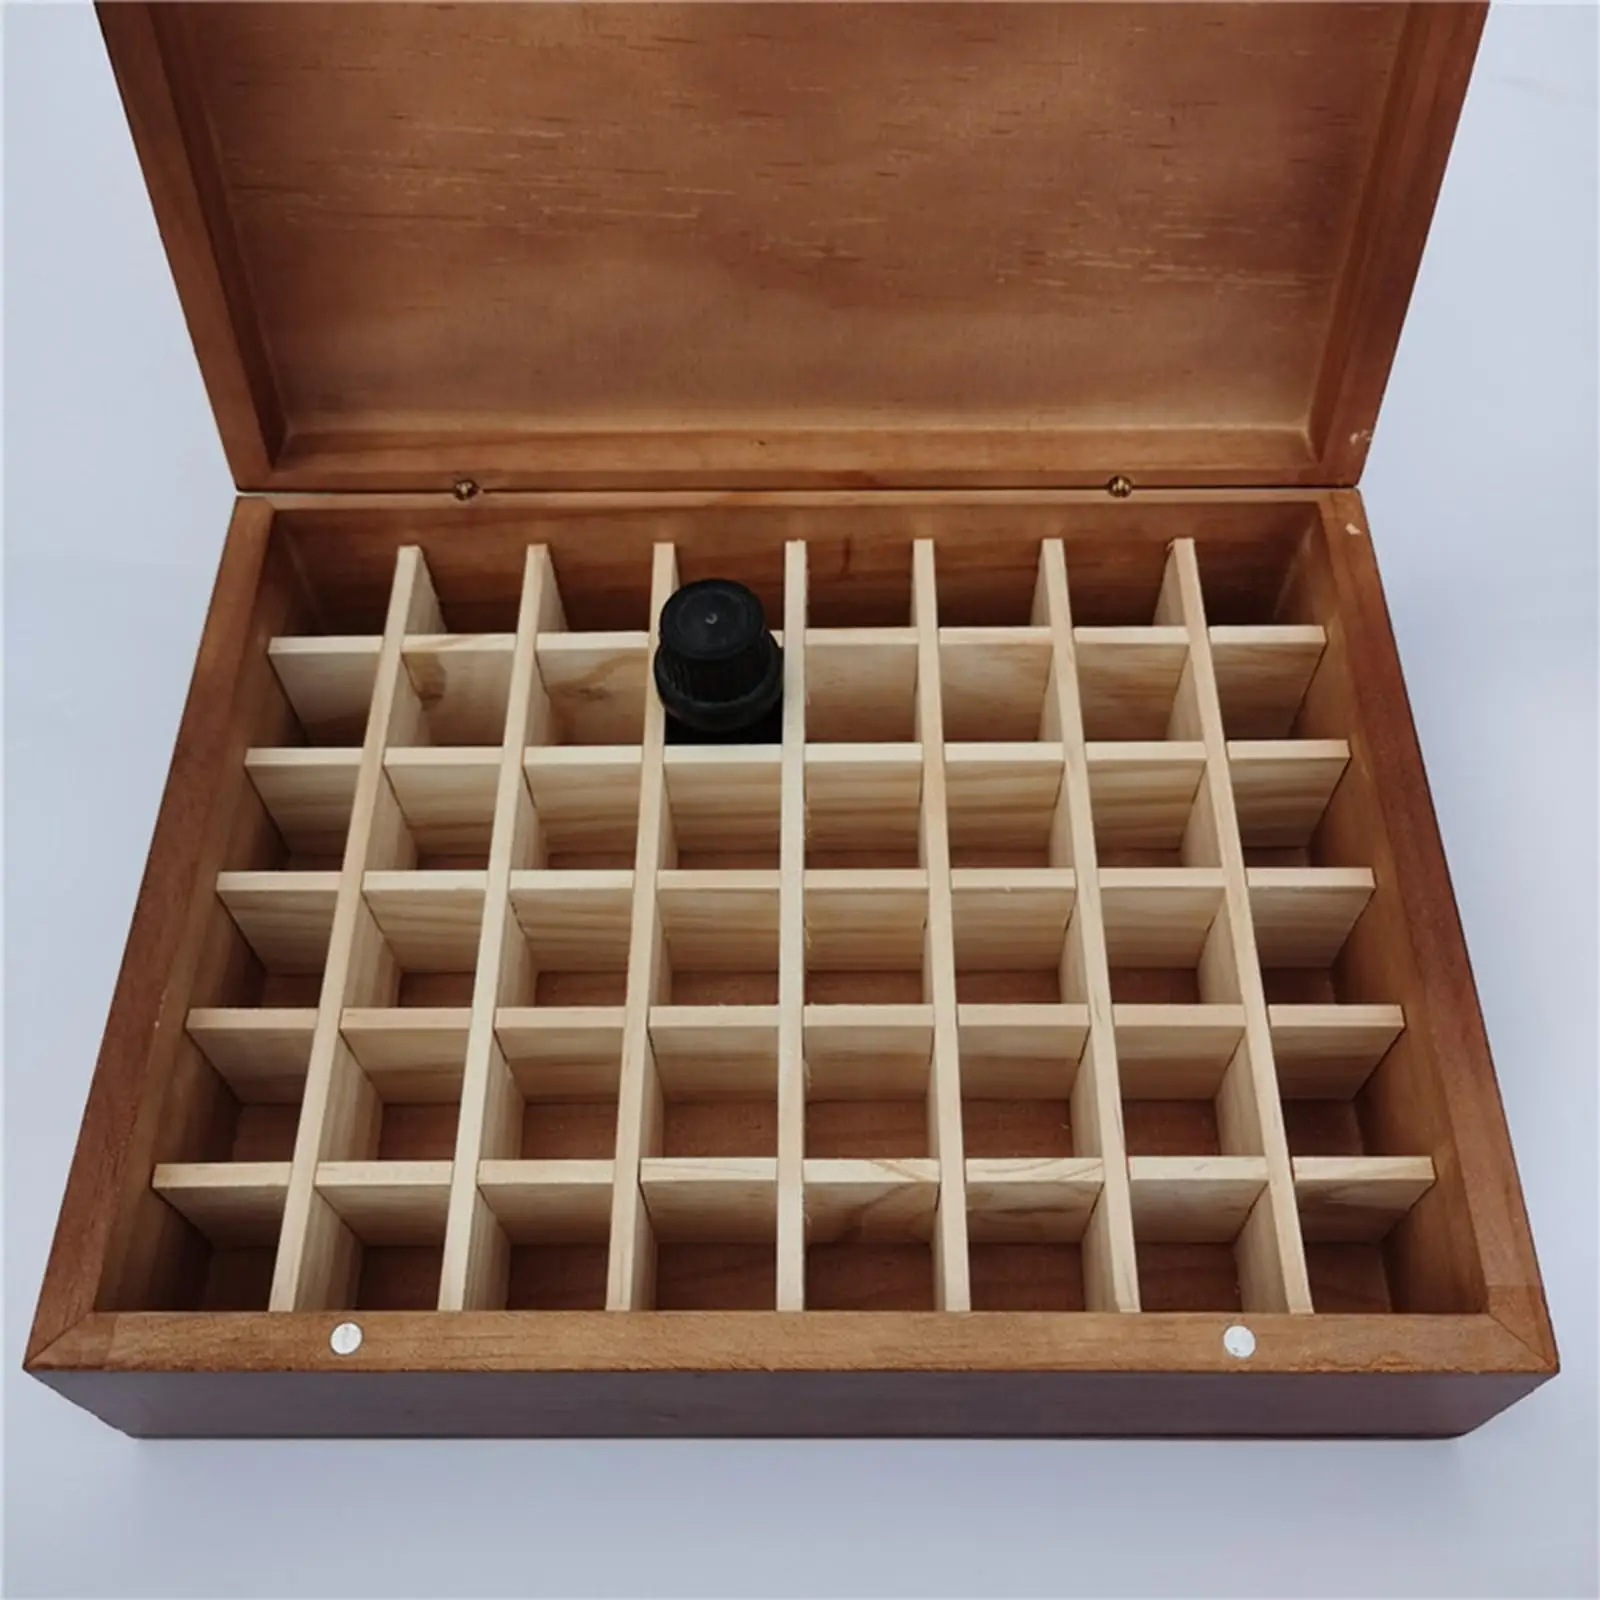 Portable Essential Oil Storage Holder 48 Slots 5ml Carry Organizing Collection Wooden Organizer Box Wooden Container